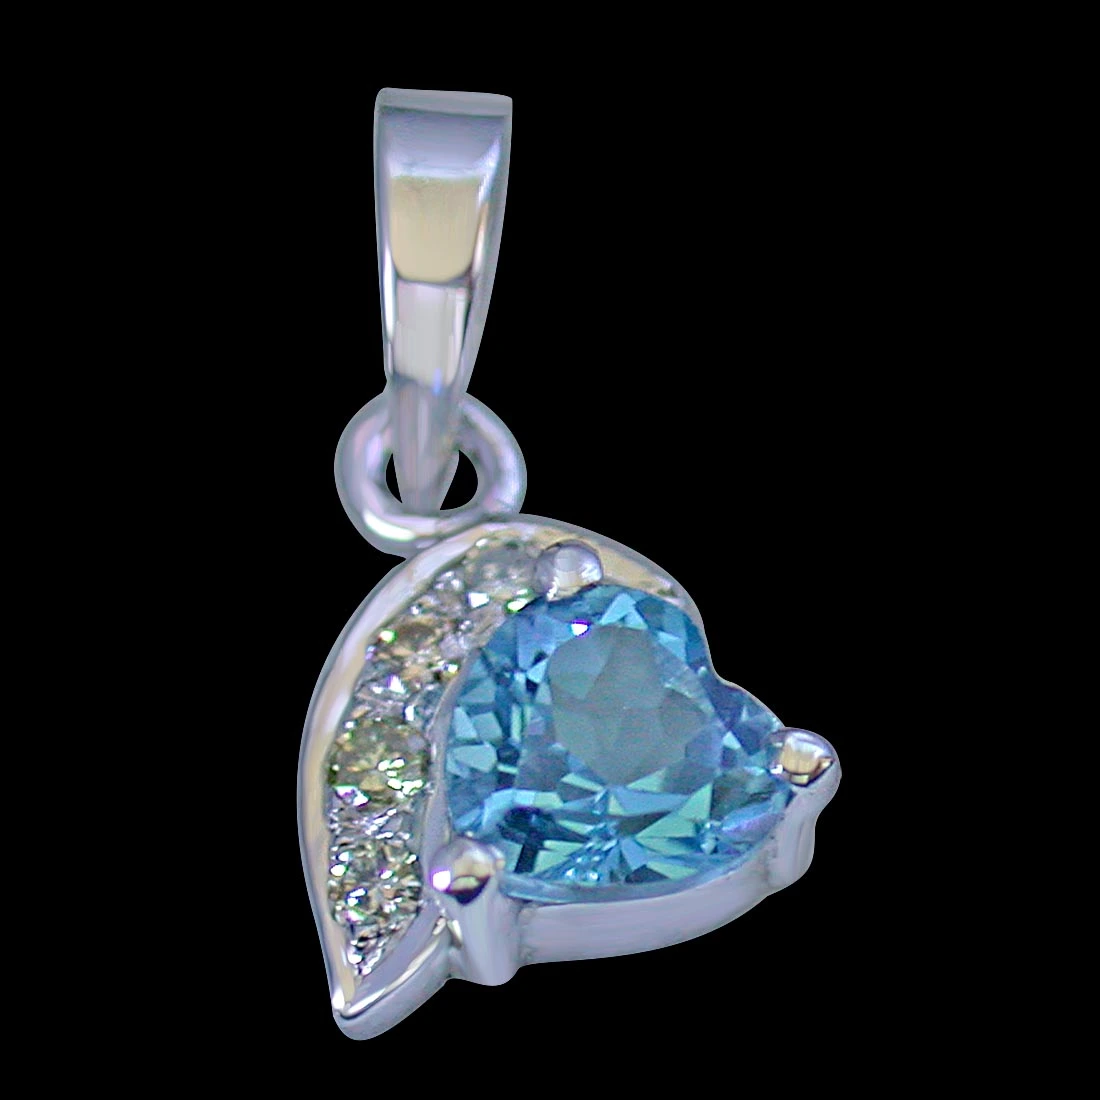 Heart Shaped Swiss Blue Topaz & 4 Big Real Diamond 925 Silver Pendant with 18 IN Chain (SDP251)